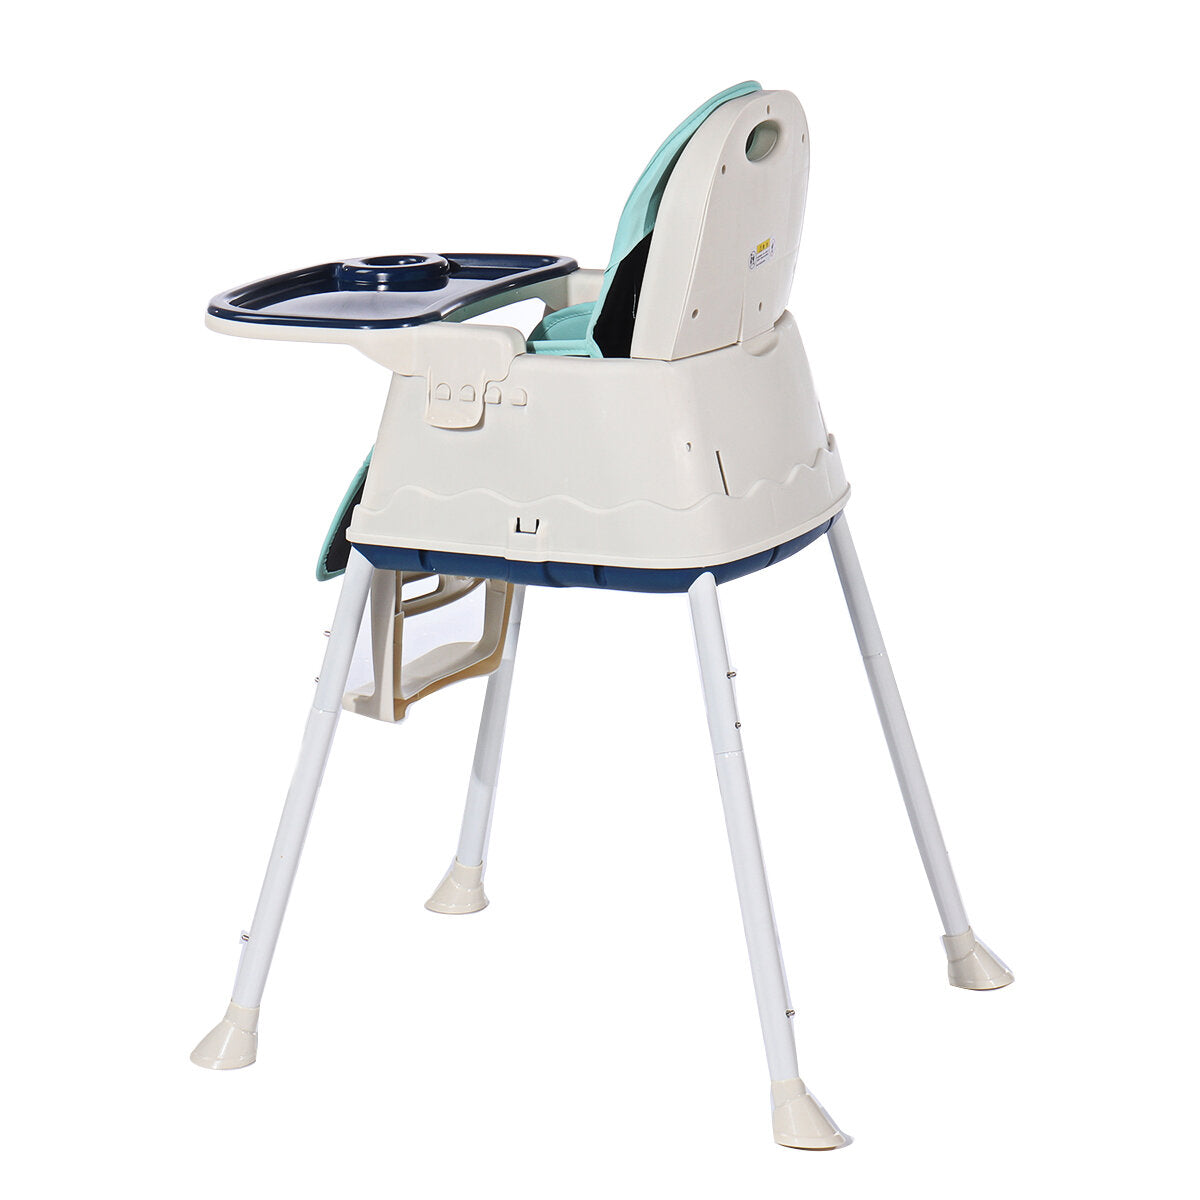 3-in-1 Kids Feeding Chair Baby Toddler Adjustable Highchair Booster Play with Tray Wheel